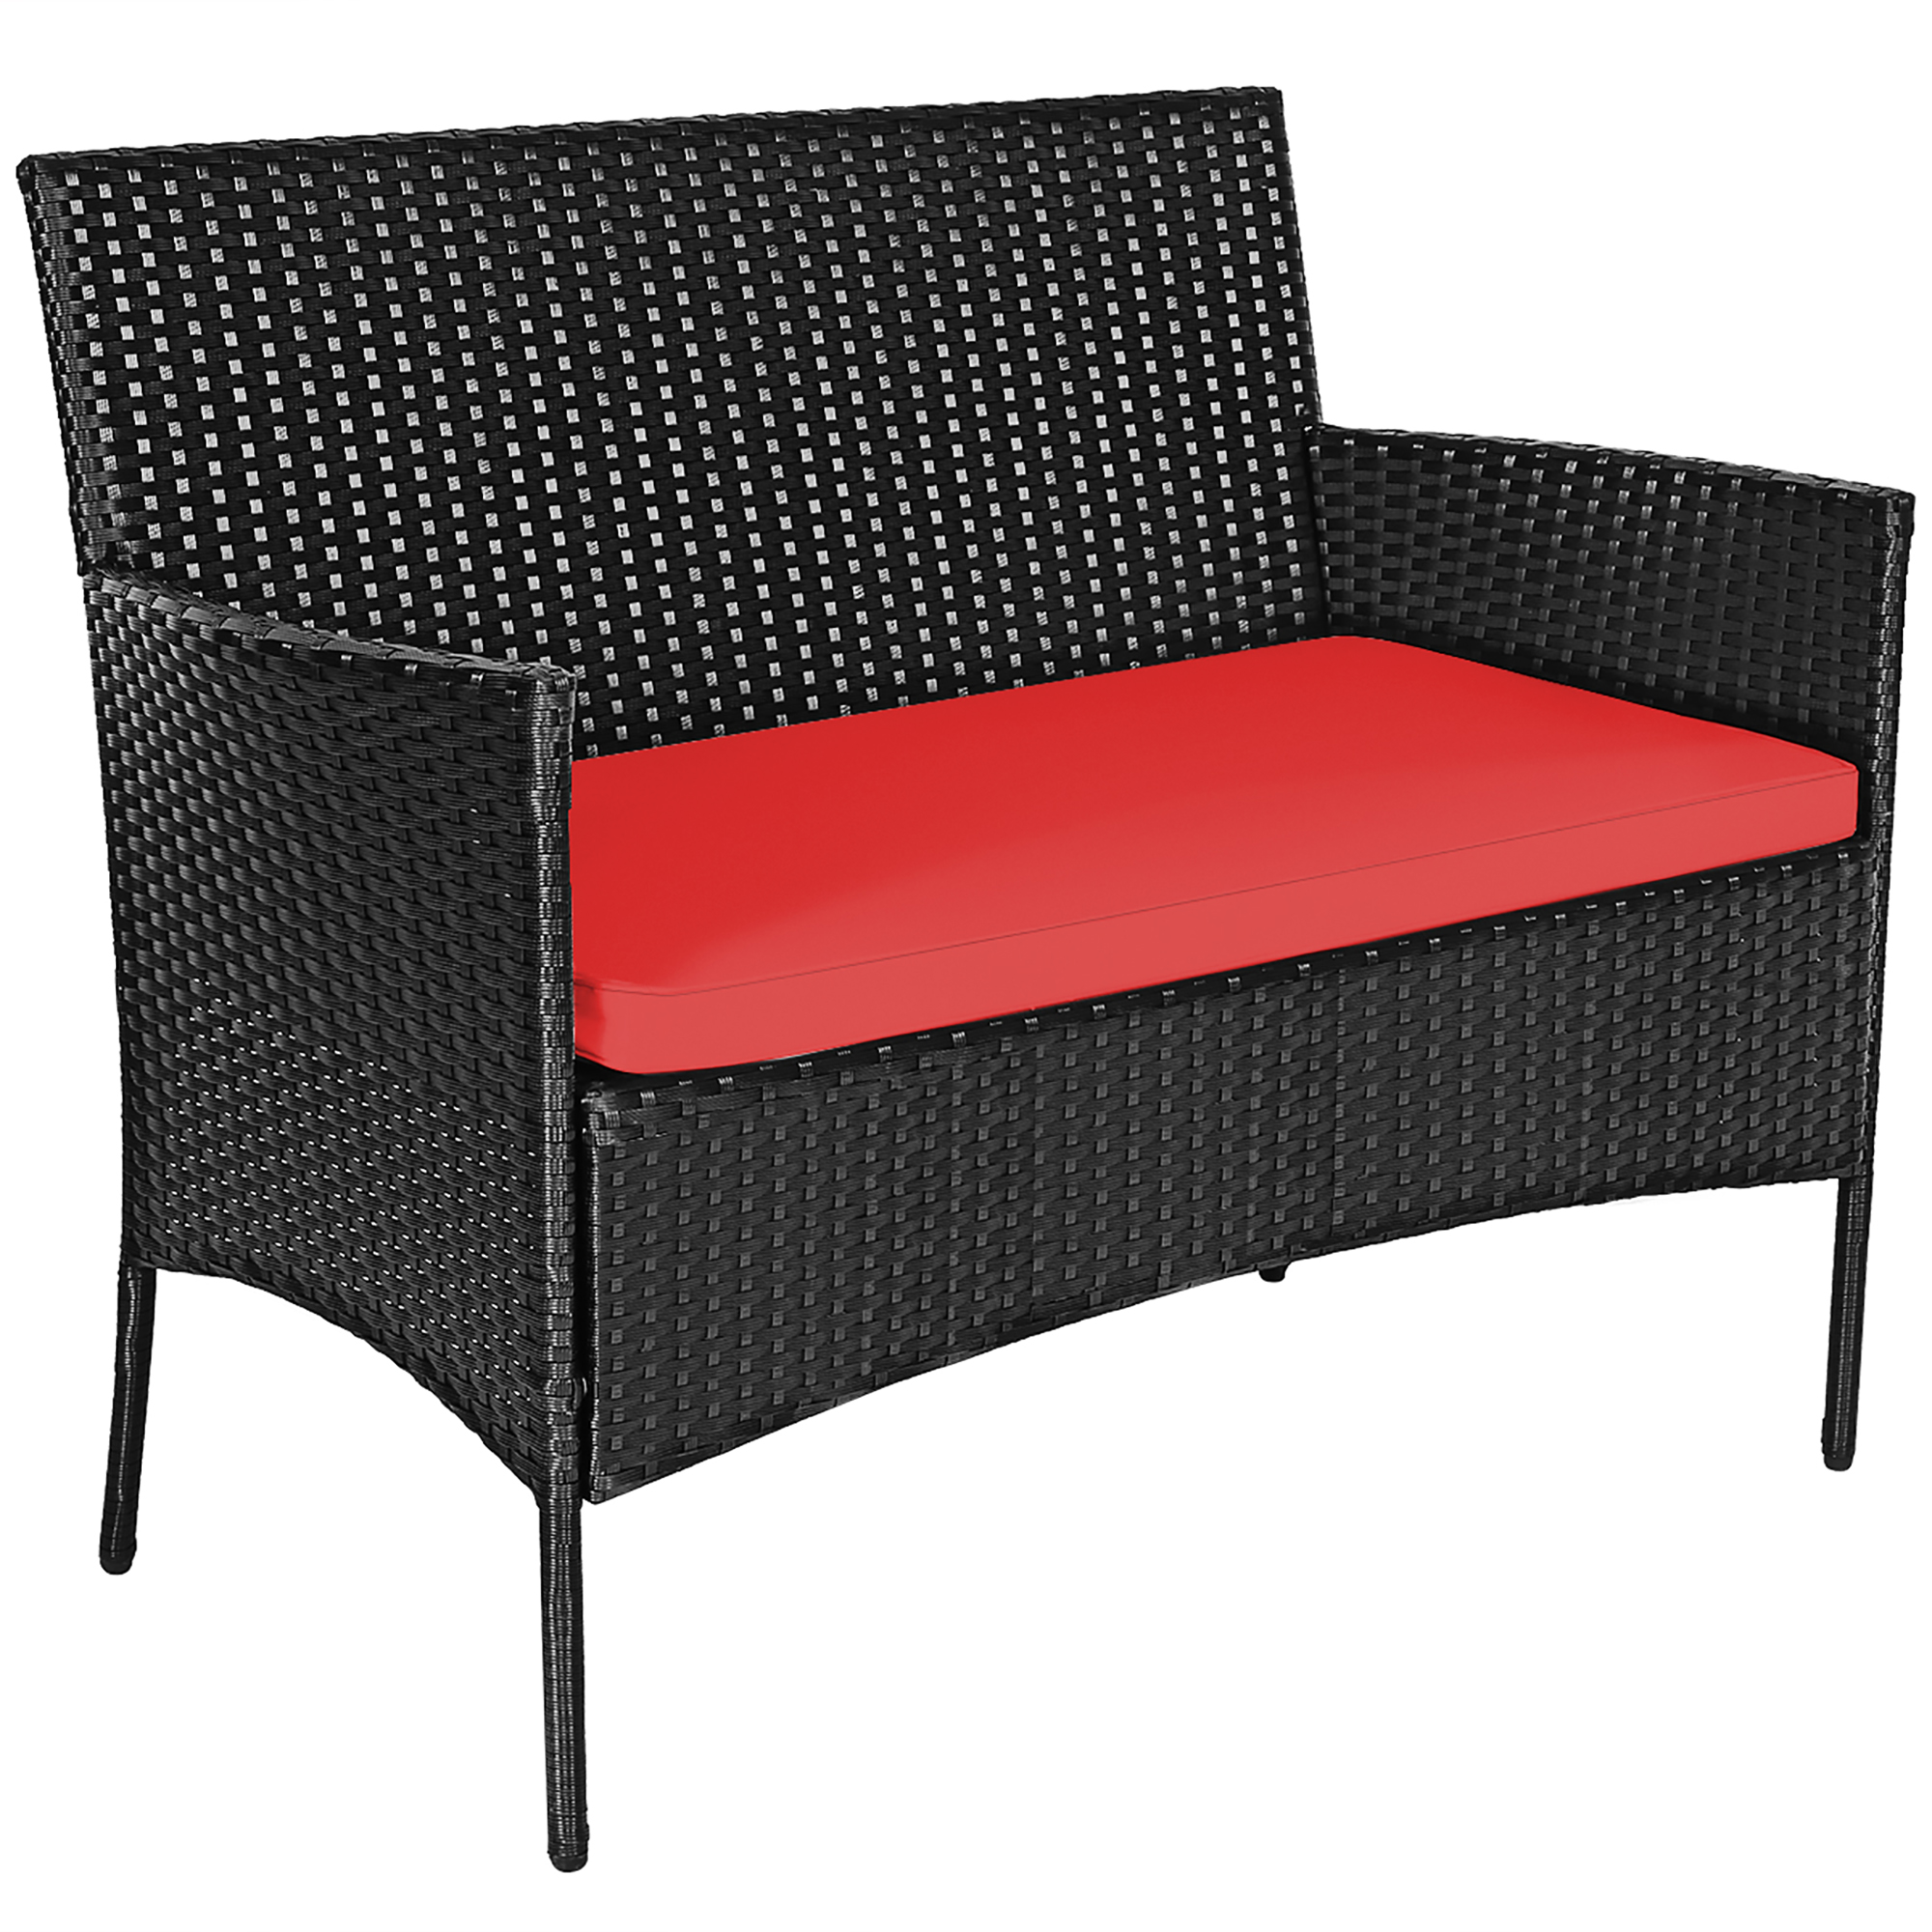 Costway 4PCS Rattan Patio Furniture Set Cushioned Sofa Chair Coffee Table Red - image 9 of 10